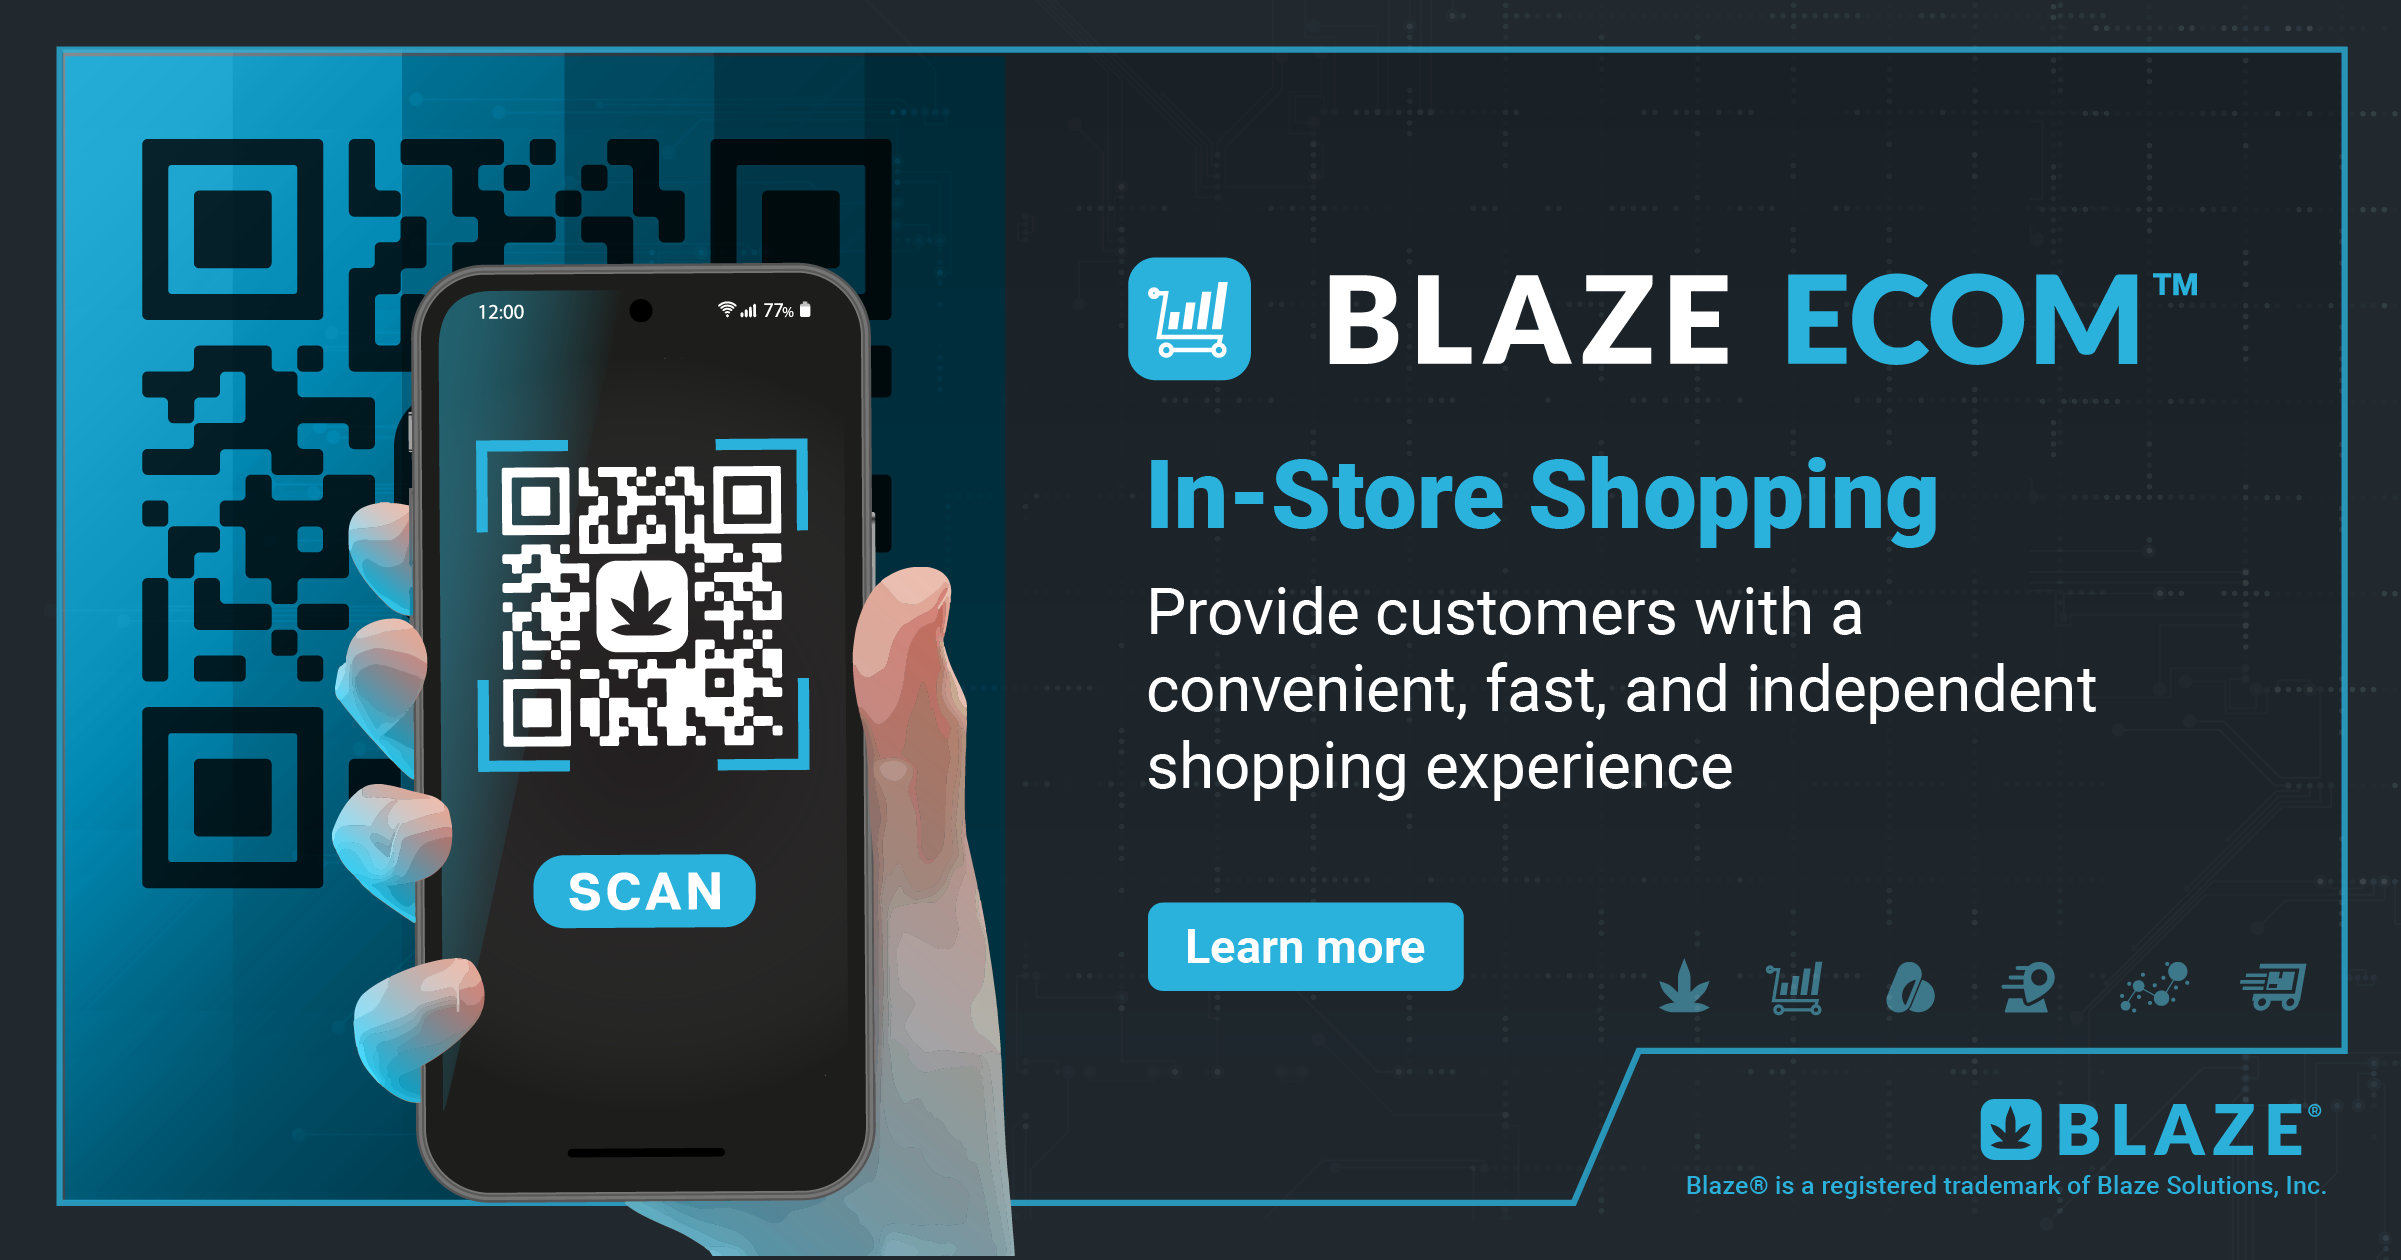 BLAZE ECOM In-Store Shopping Experience